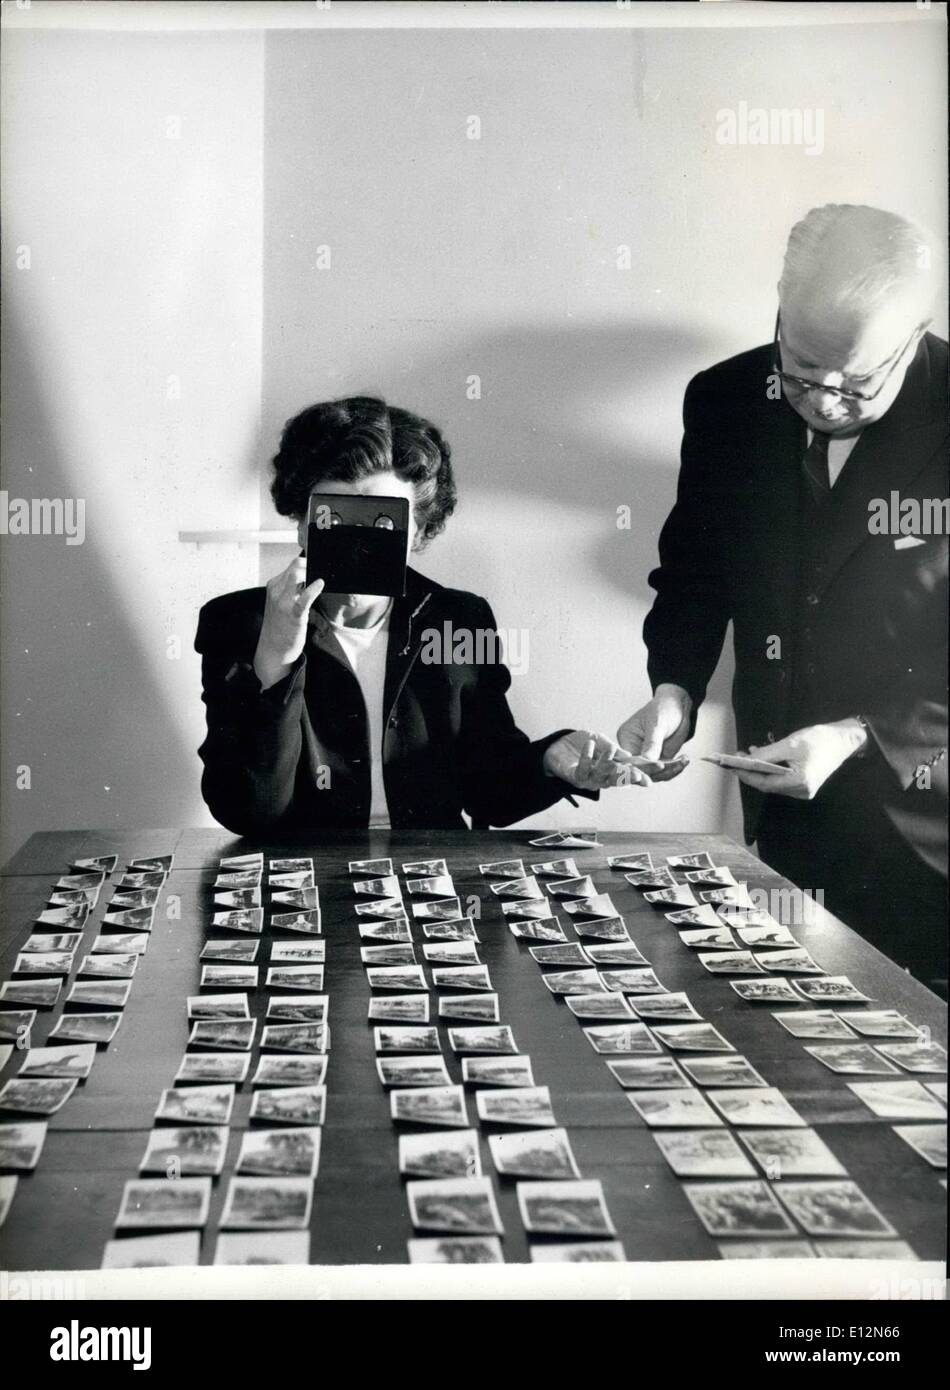 Feb. 24, 2012 - Stereoscopic cigarette cards. A rarity among cigarette card, stereoscopic pairs which were issued before the war in America. All the real photographs. Colonel Bagnall's daughter Dorothy, is viewing them through a stereoscope. Stock Photo